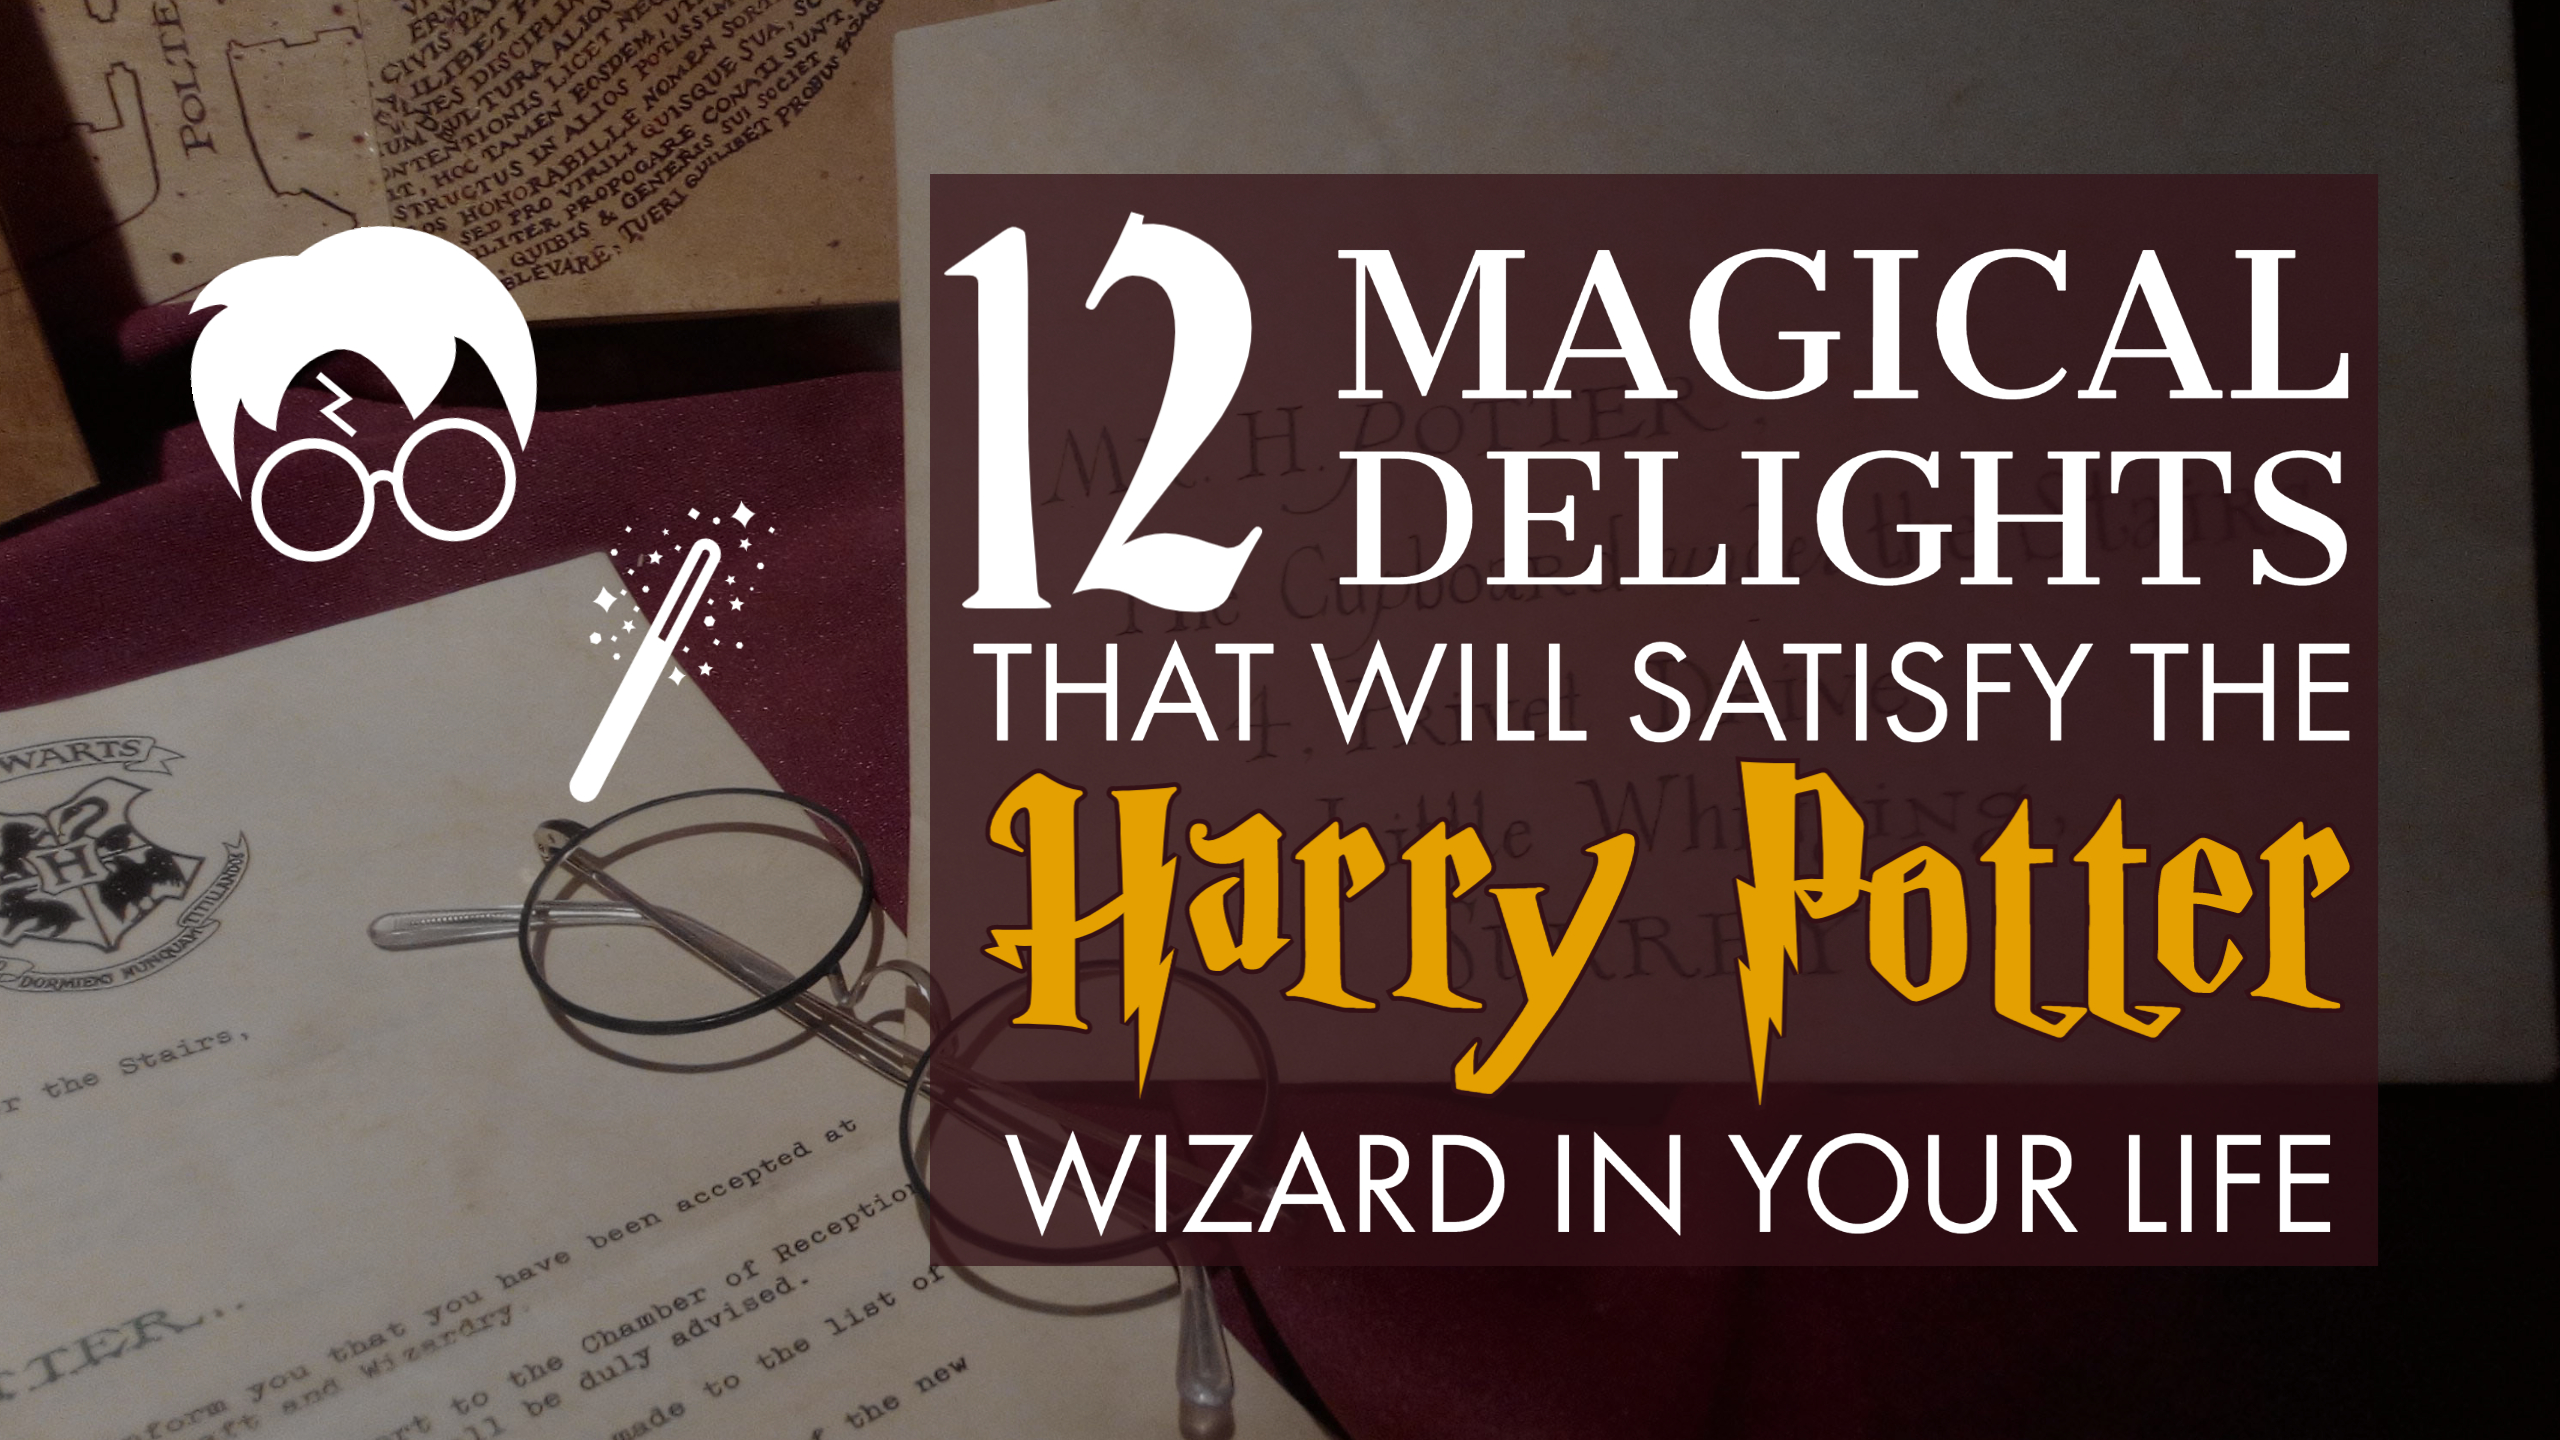 Magical Delights That Will Satisfy The Harry Potter Wizard In Your Life Header